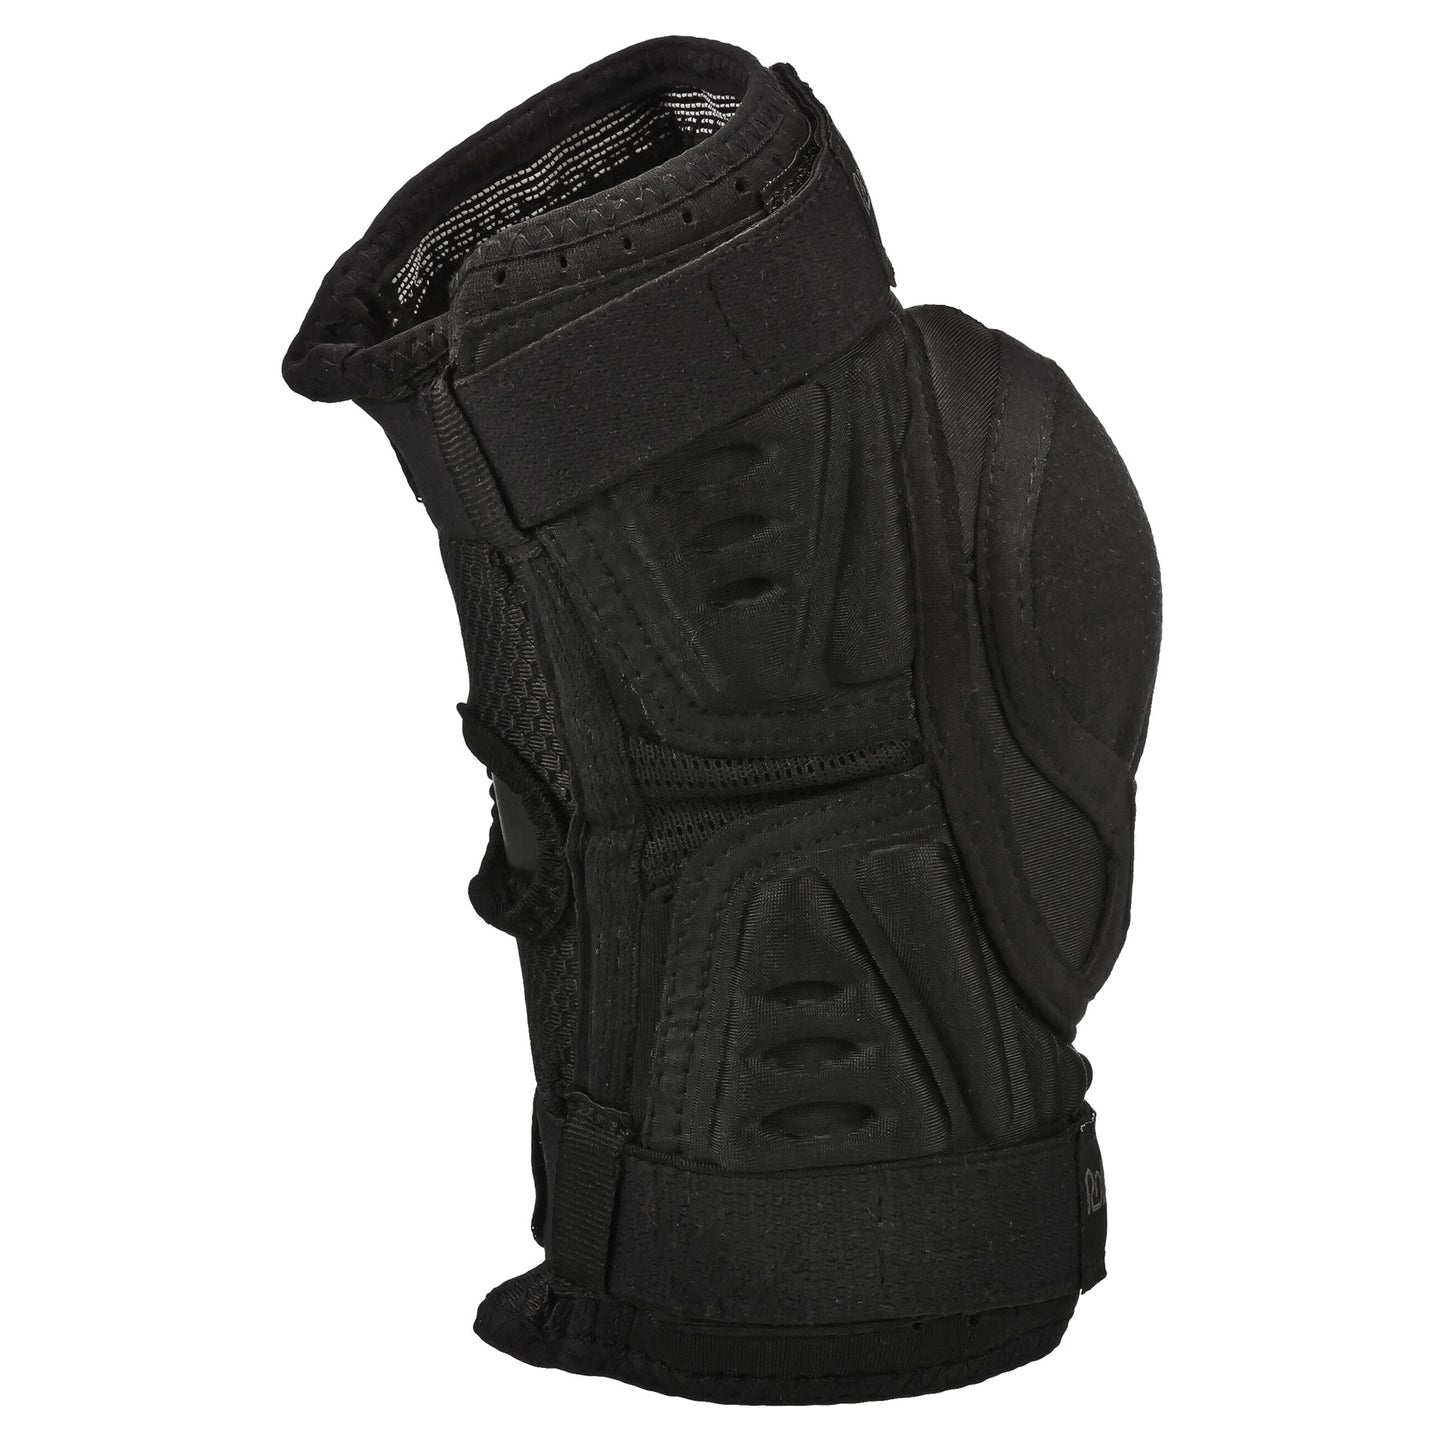 RDE Star Adult Elbow Pads